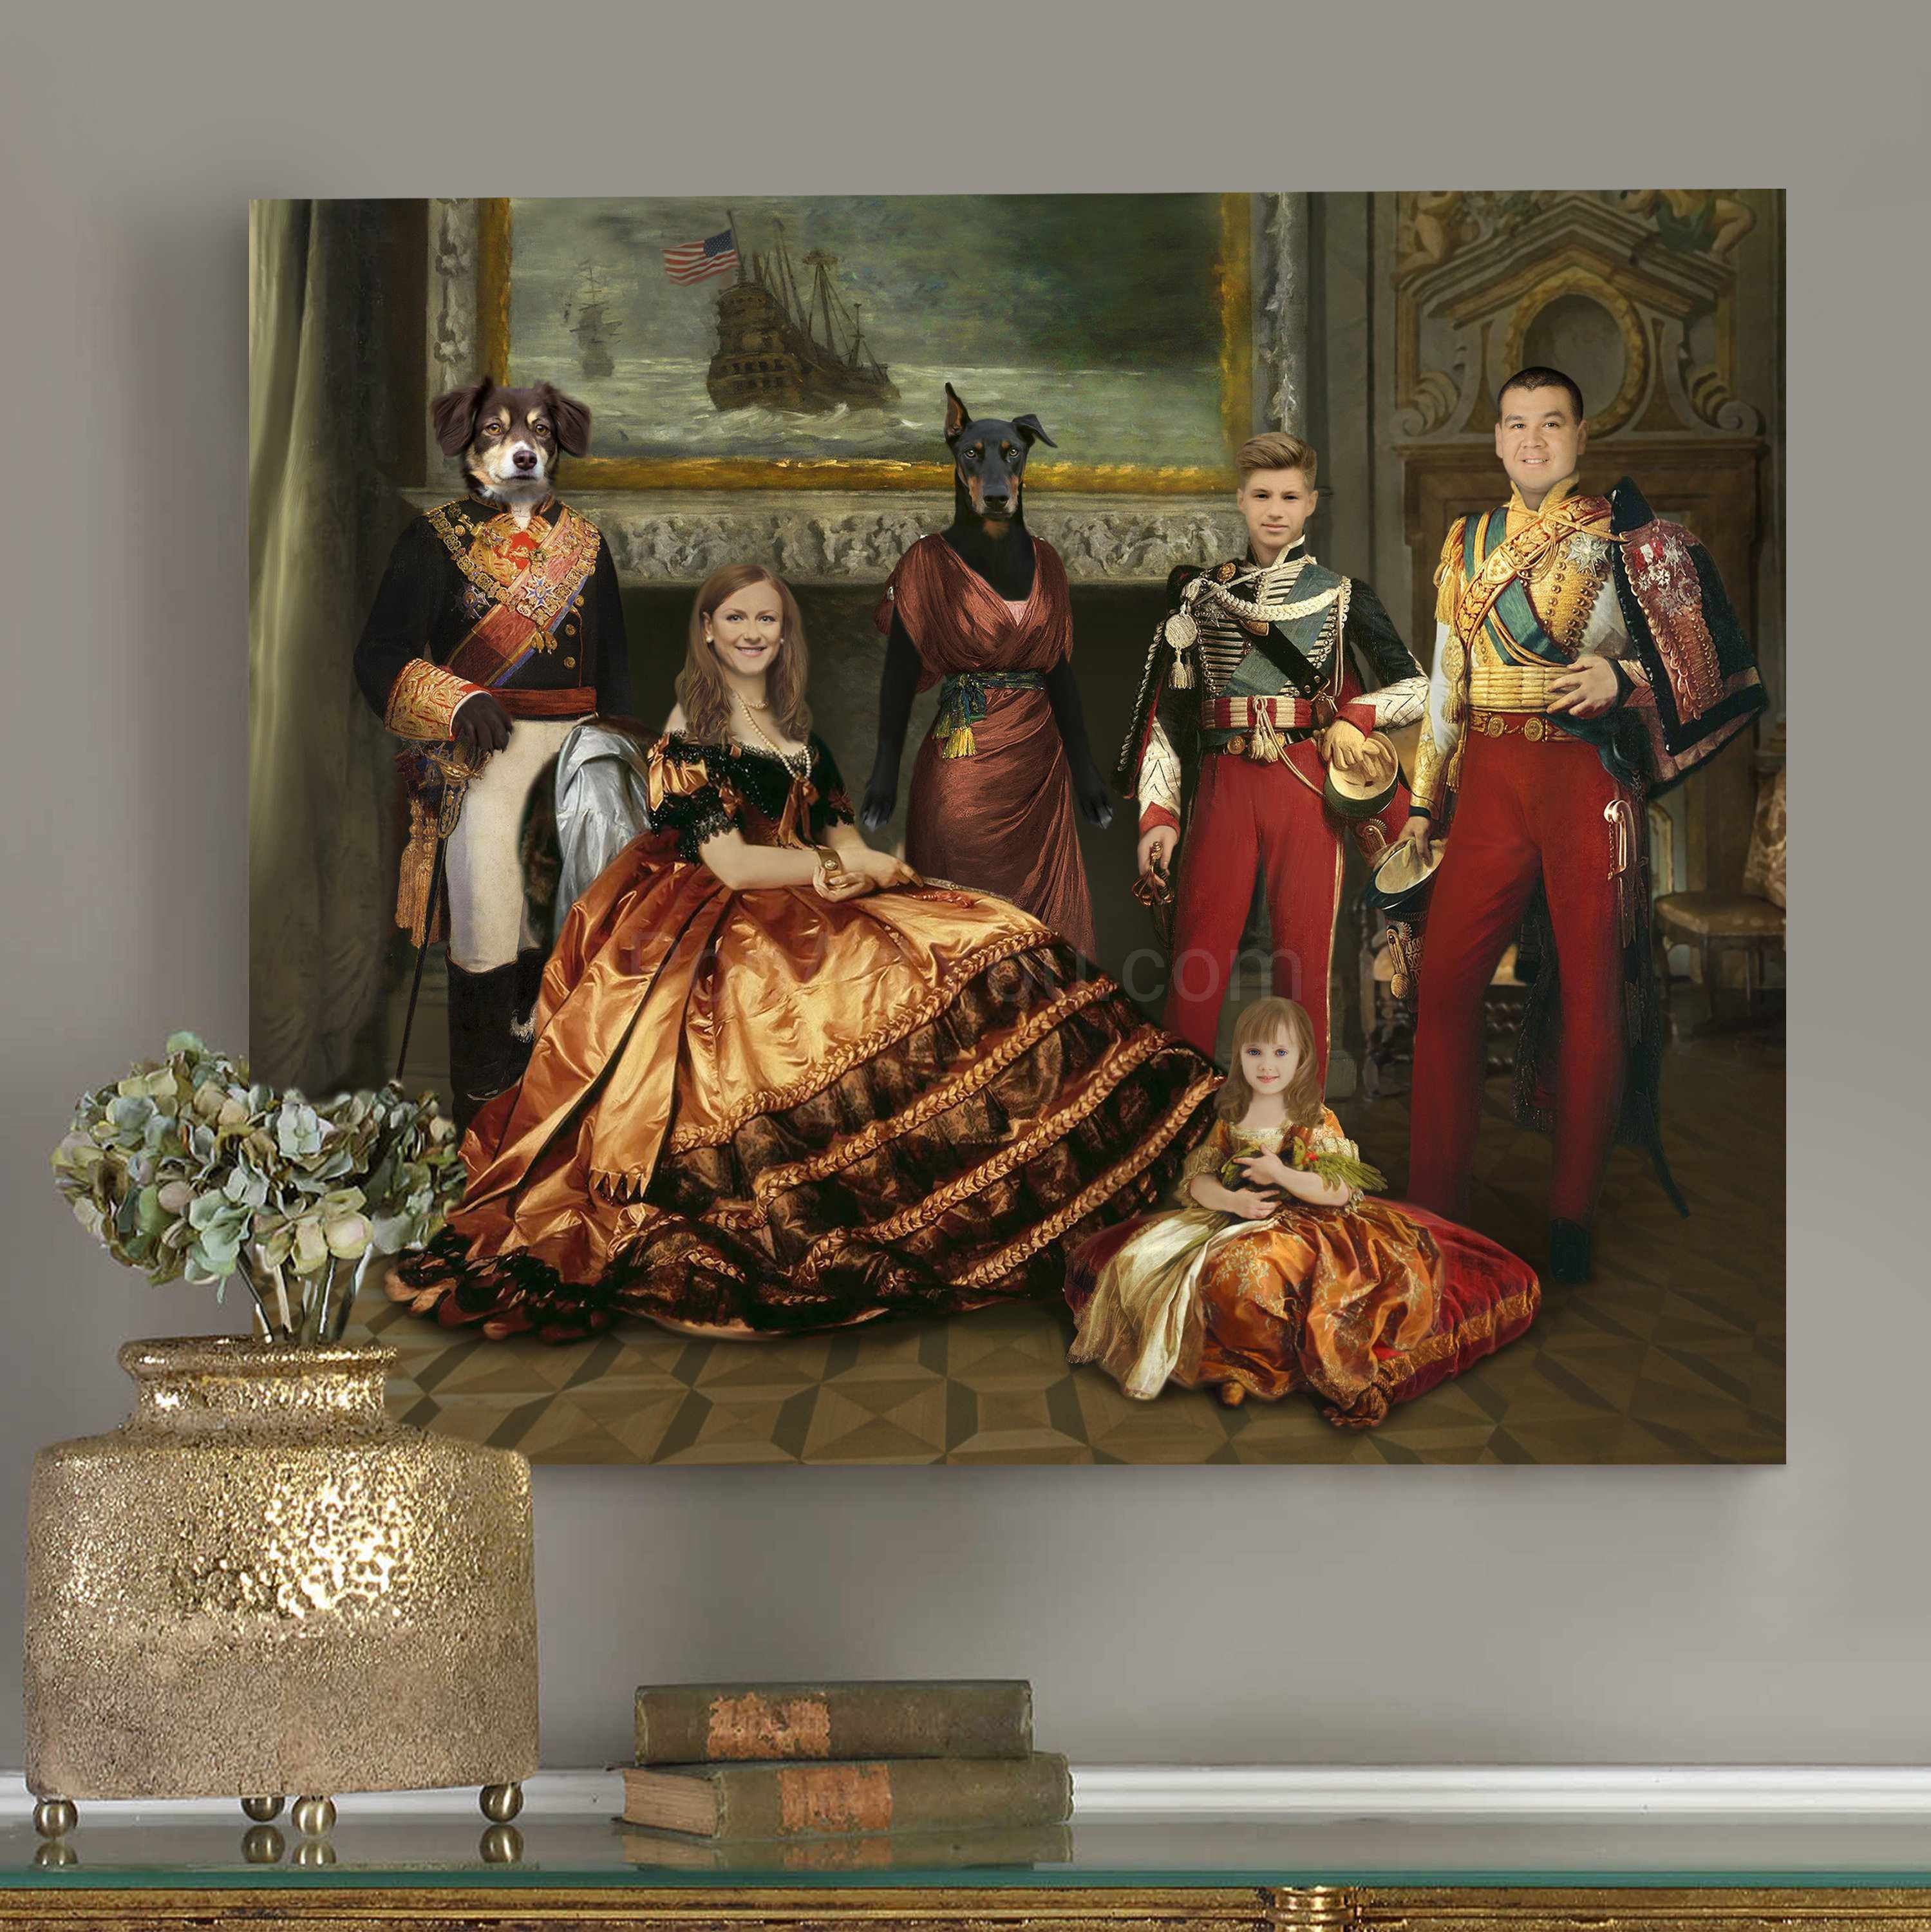 Portrait of a royal family dressed in historical gold clothes with a dog with a human body hanging on a gray wall near a golden vase